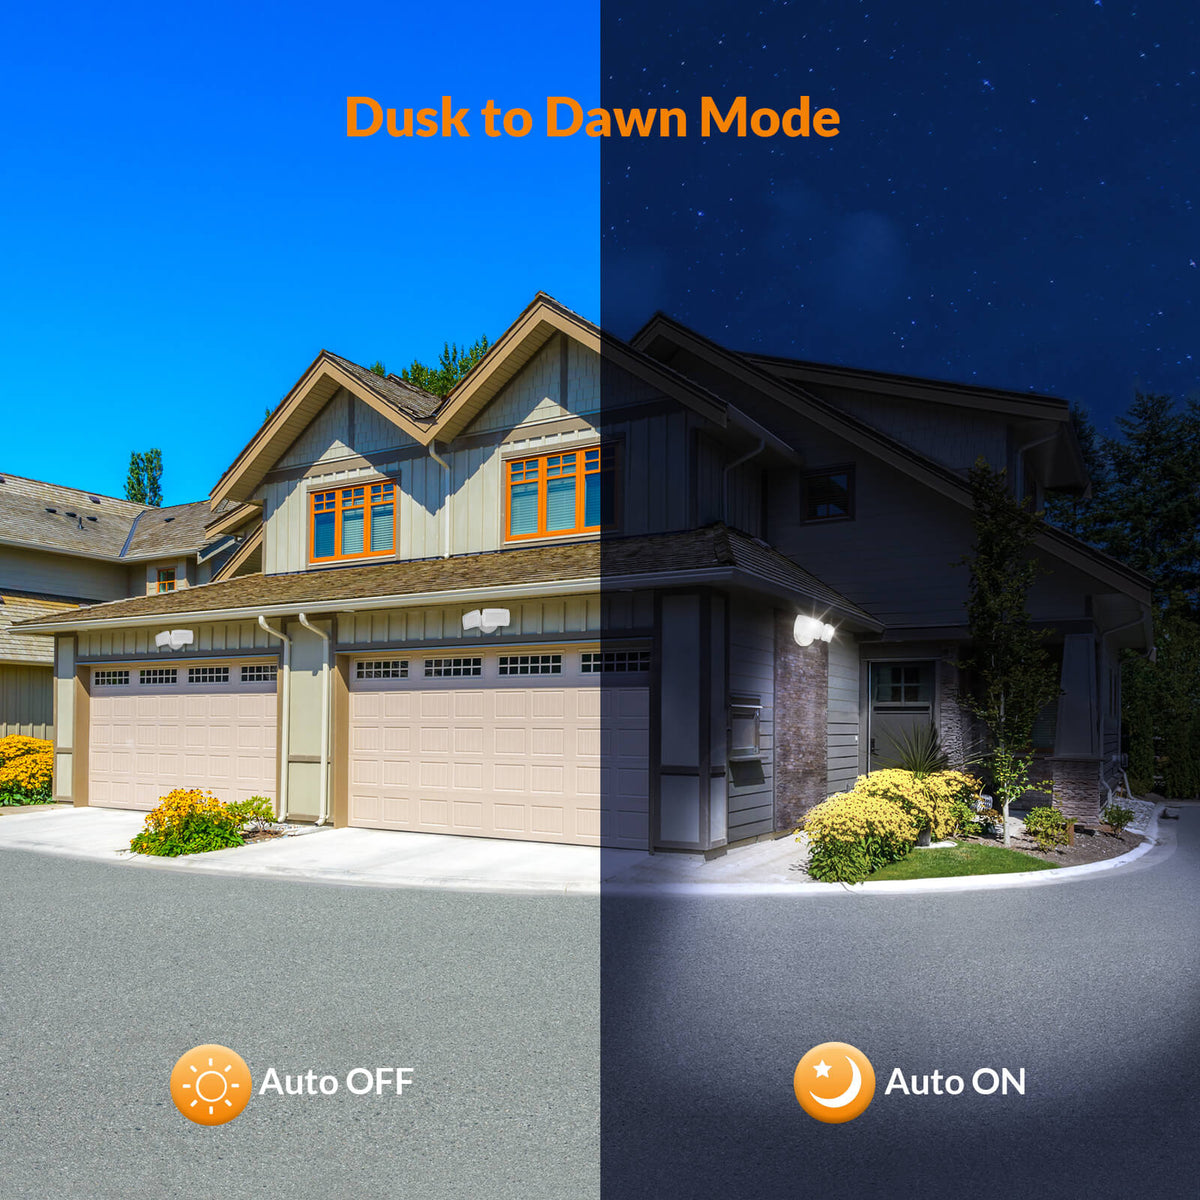 Backyard Black LEPOWER 3000LM Dusk to Dawn LED Security Light 2 Pack IP65 Waterproof 2 Heads Exterior Flood Light for Garage 5500K 28W Super Bright Outdoor Flood Light with Photocell 